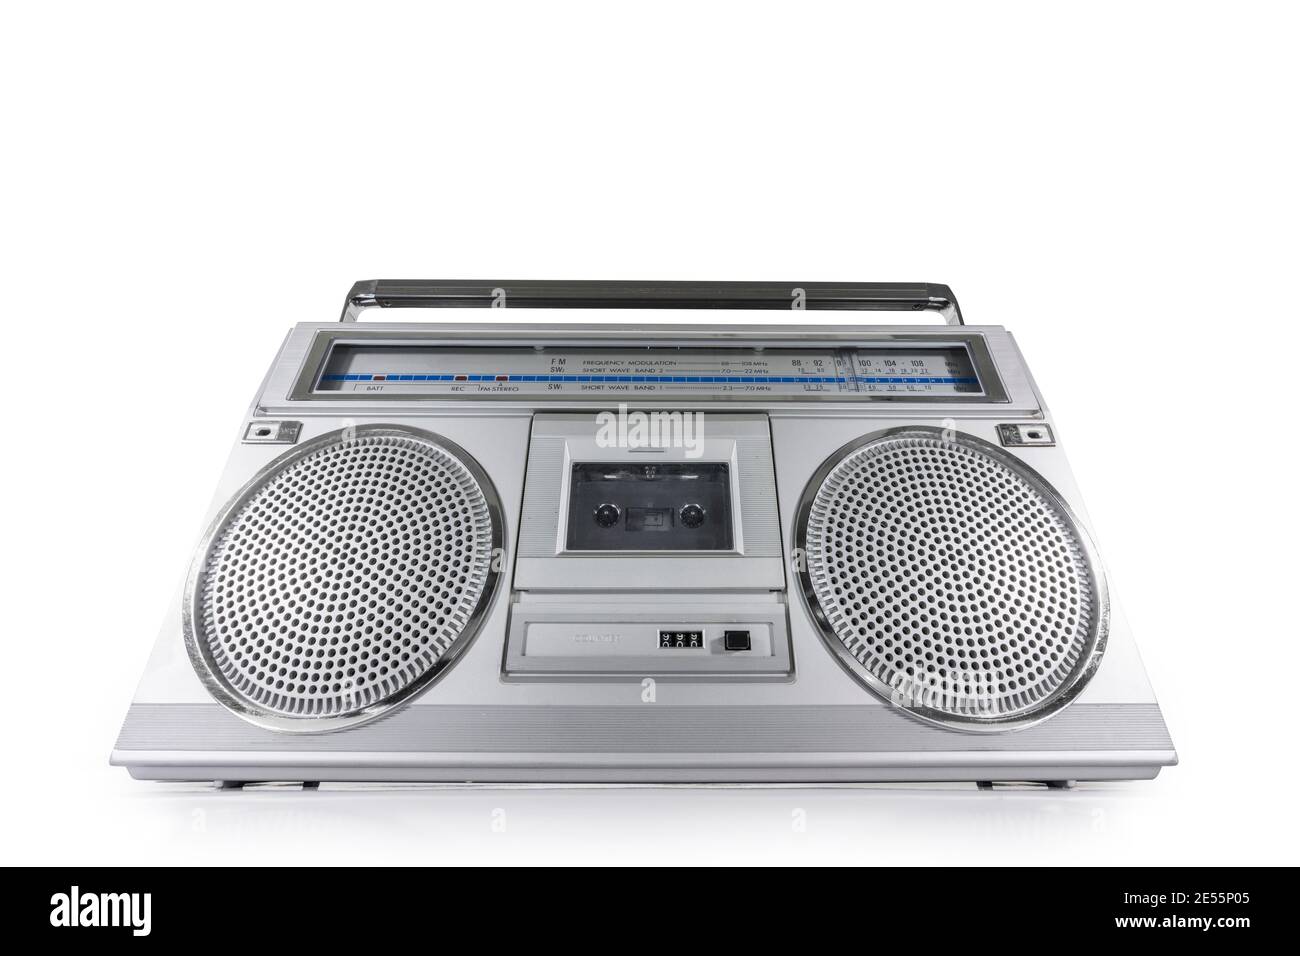 Vintage boombox style FM and short wave radio, stereo cassette tape player and recorder on white. Stock Photo